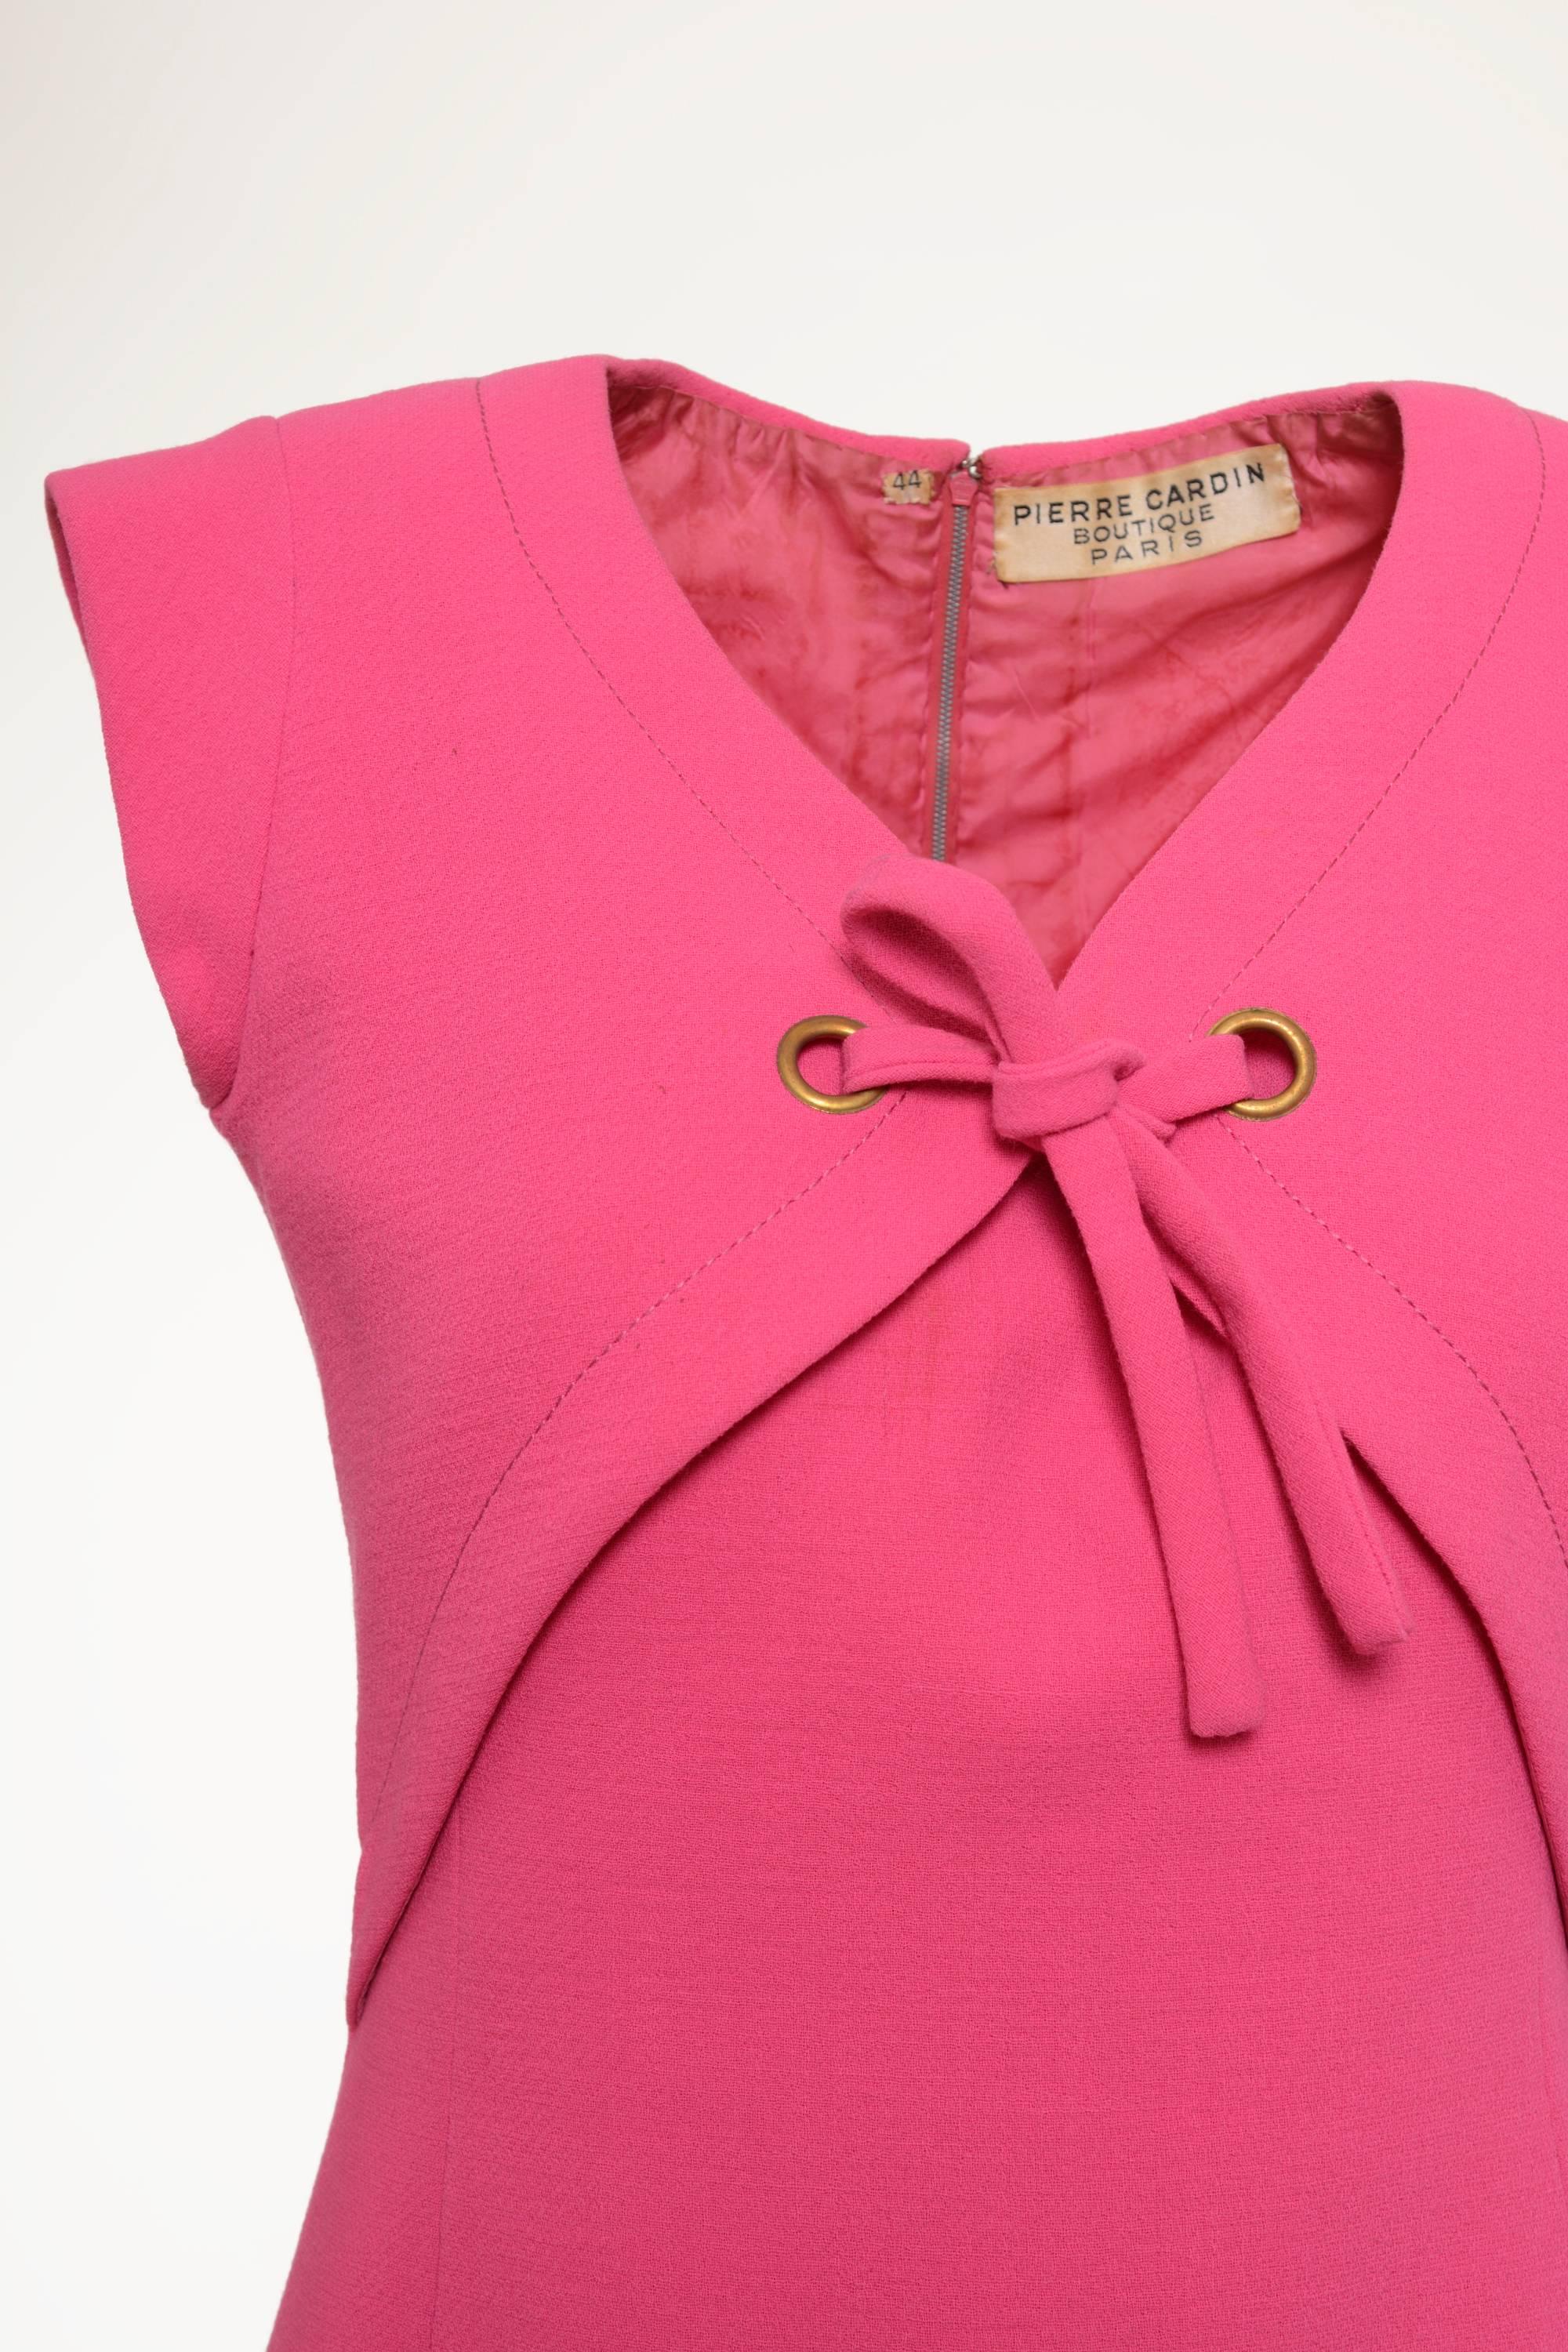 1960s PIERRE CARDIN Boutique Shocking Pink Mod Dress In Good Condition For Sale In Milan, Italy